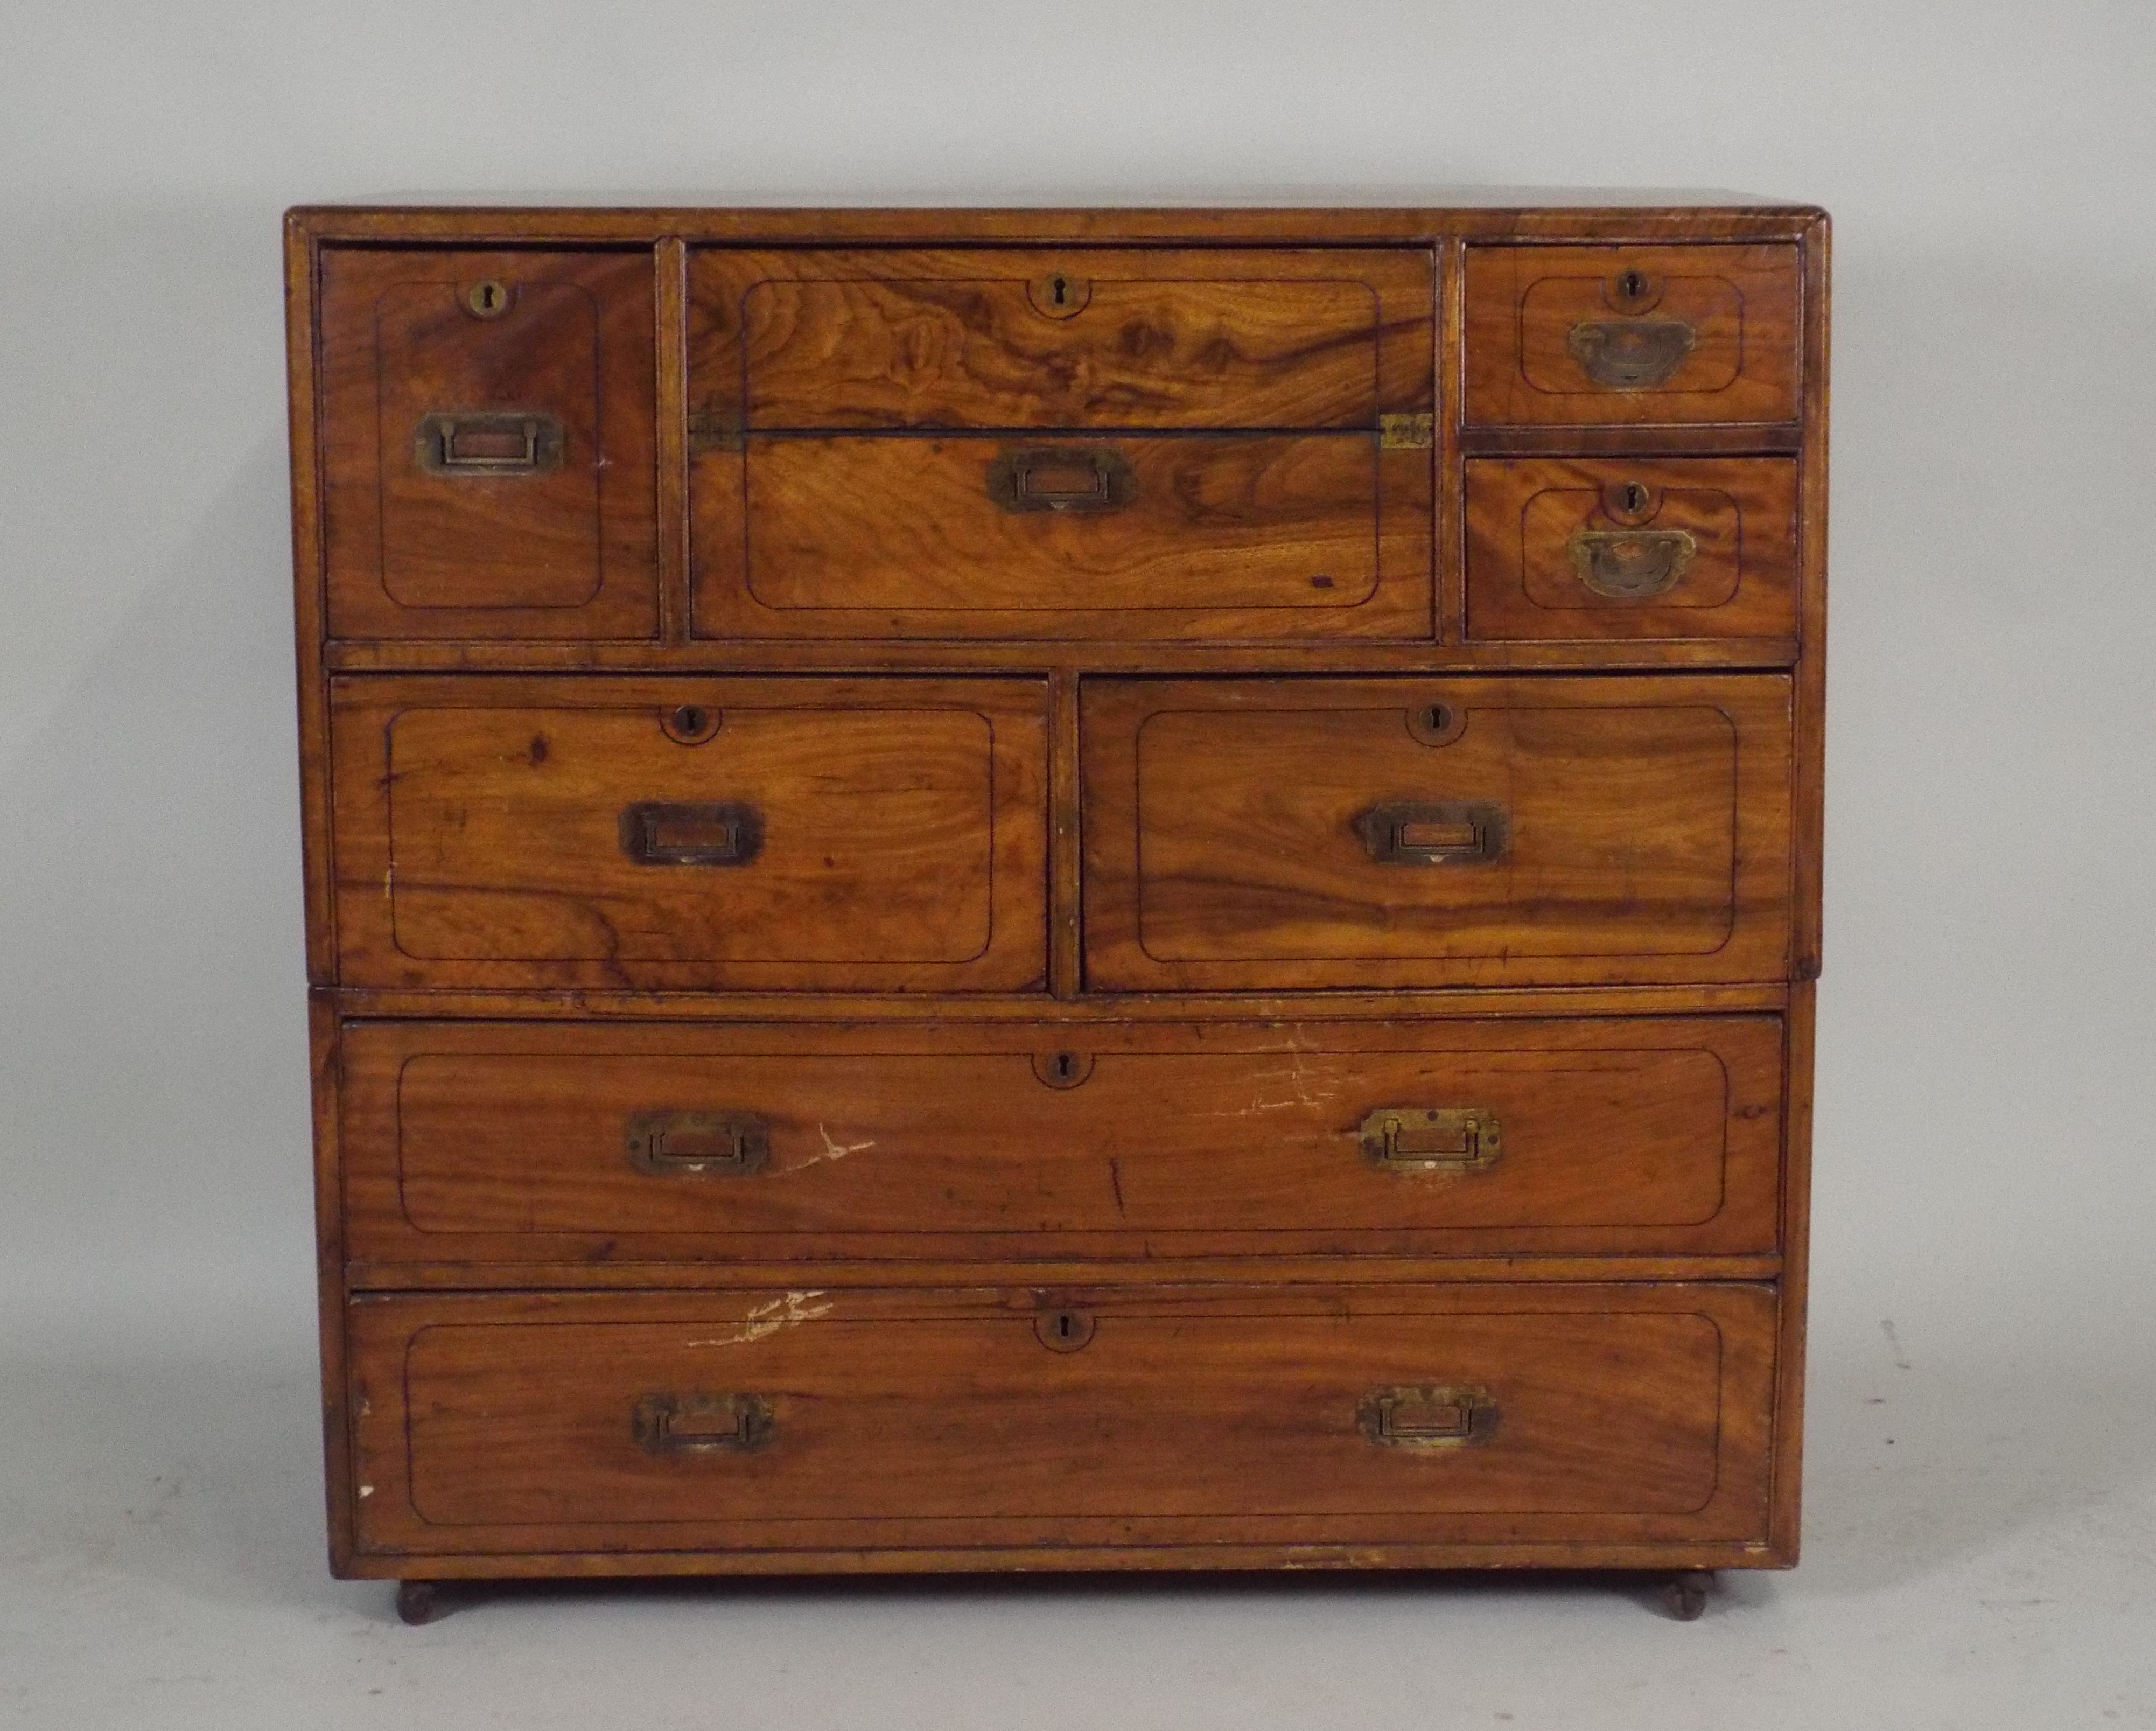 A 19th century teak campaign style desk/chest, the rectangular top with rounded edges over a central